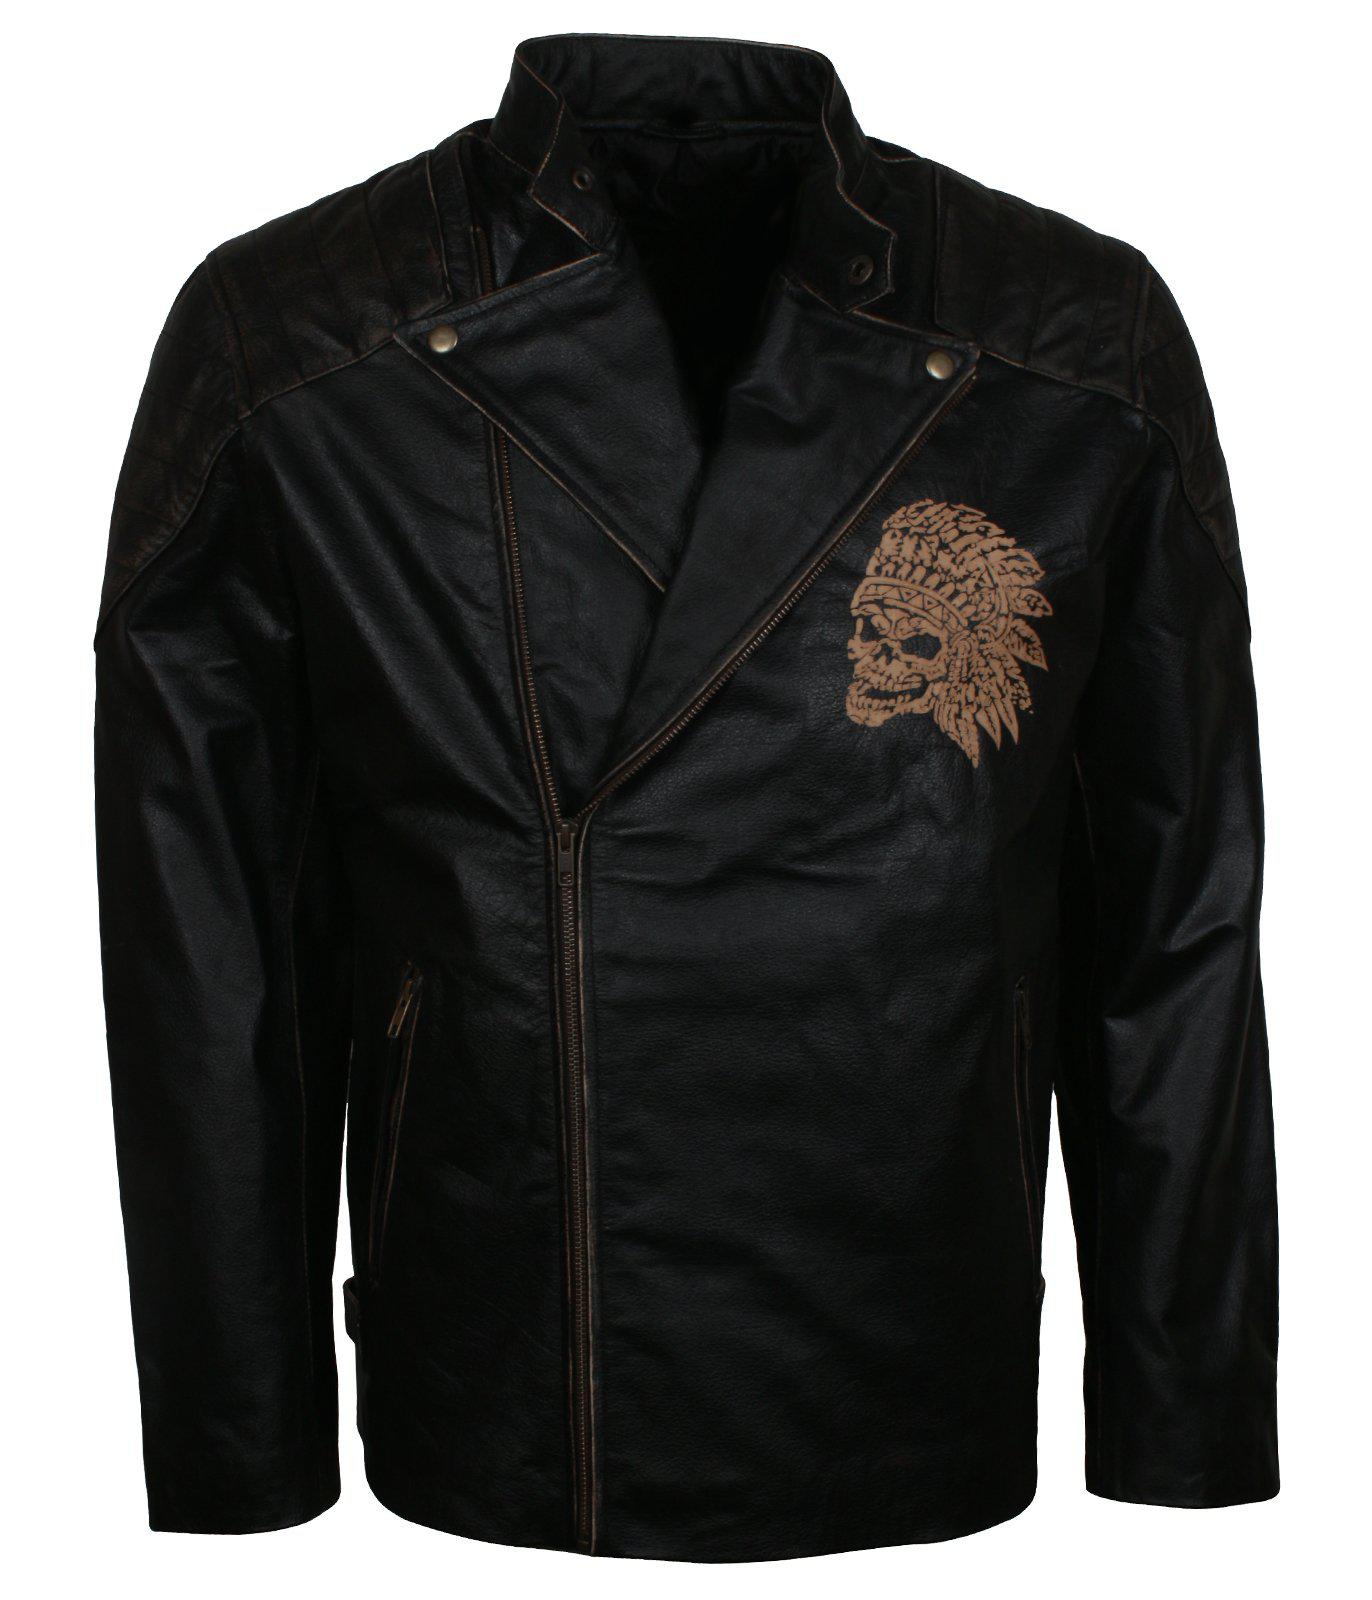 Indian Skull Motorcycle Jacket for Bikers in Leather